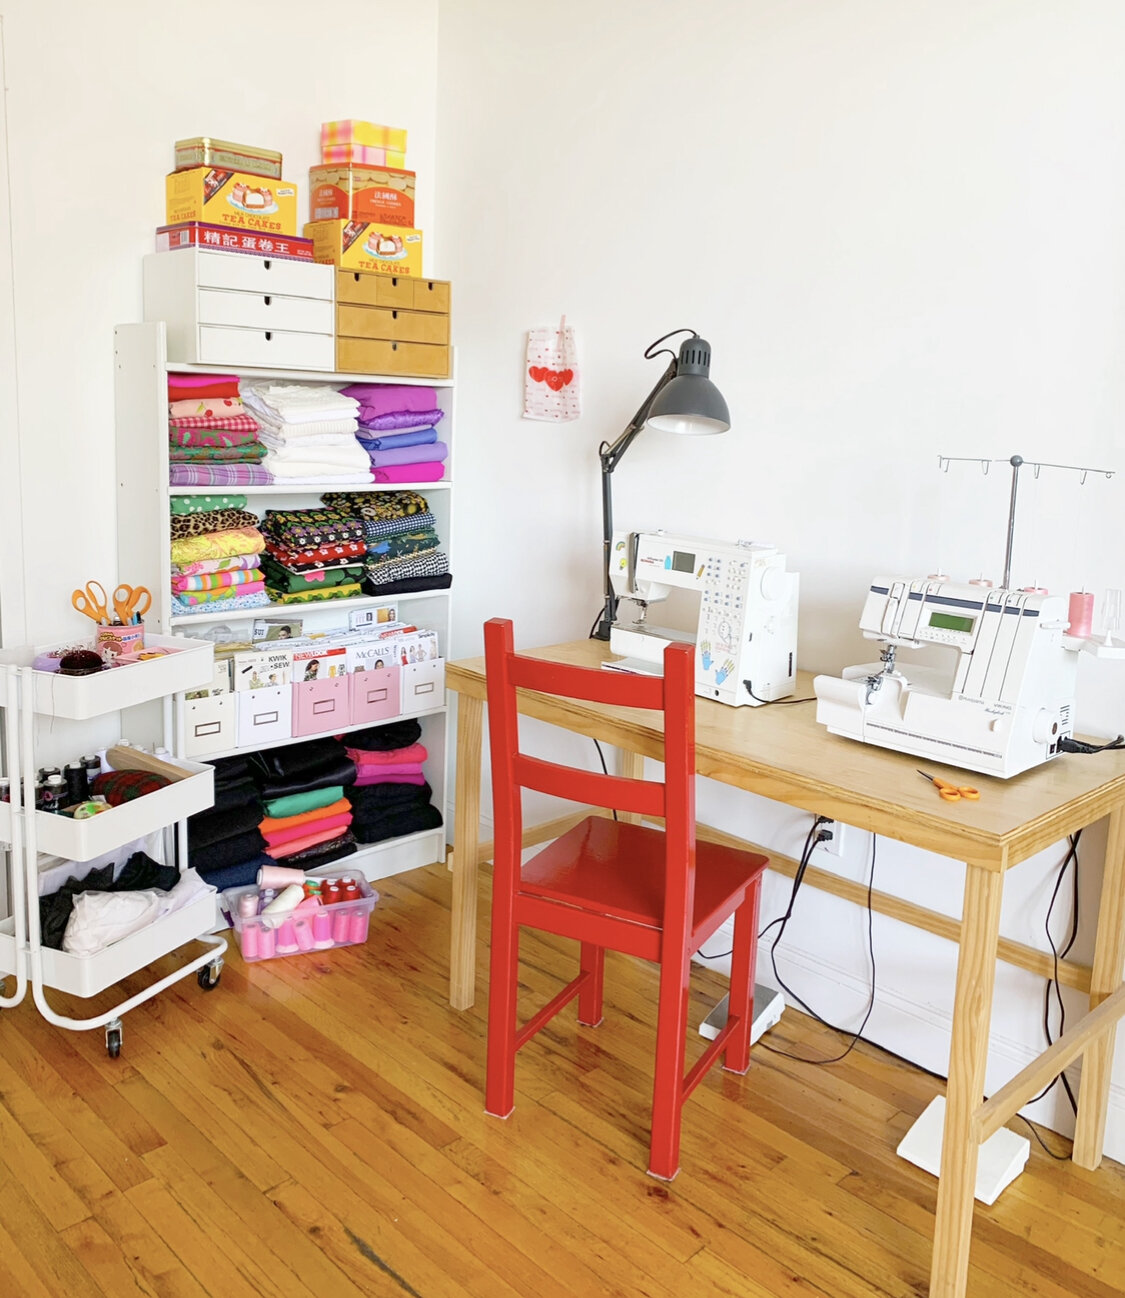  My sewing space! I set up the ironing board wherever there was room. 